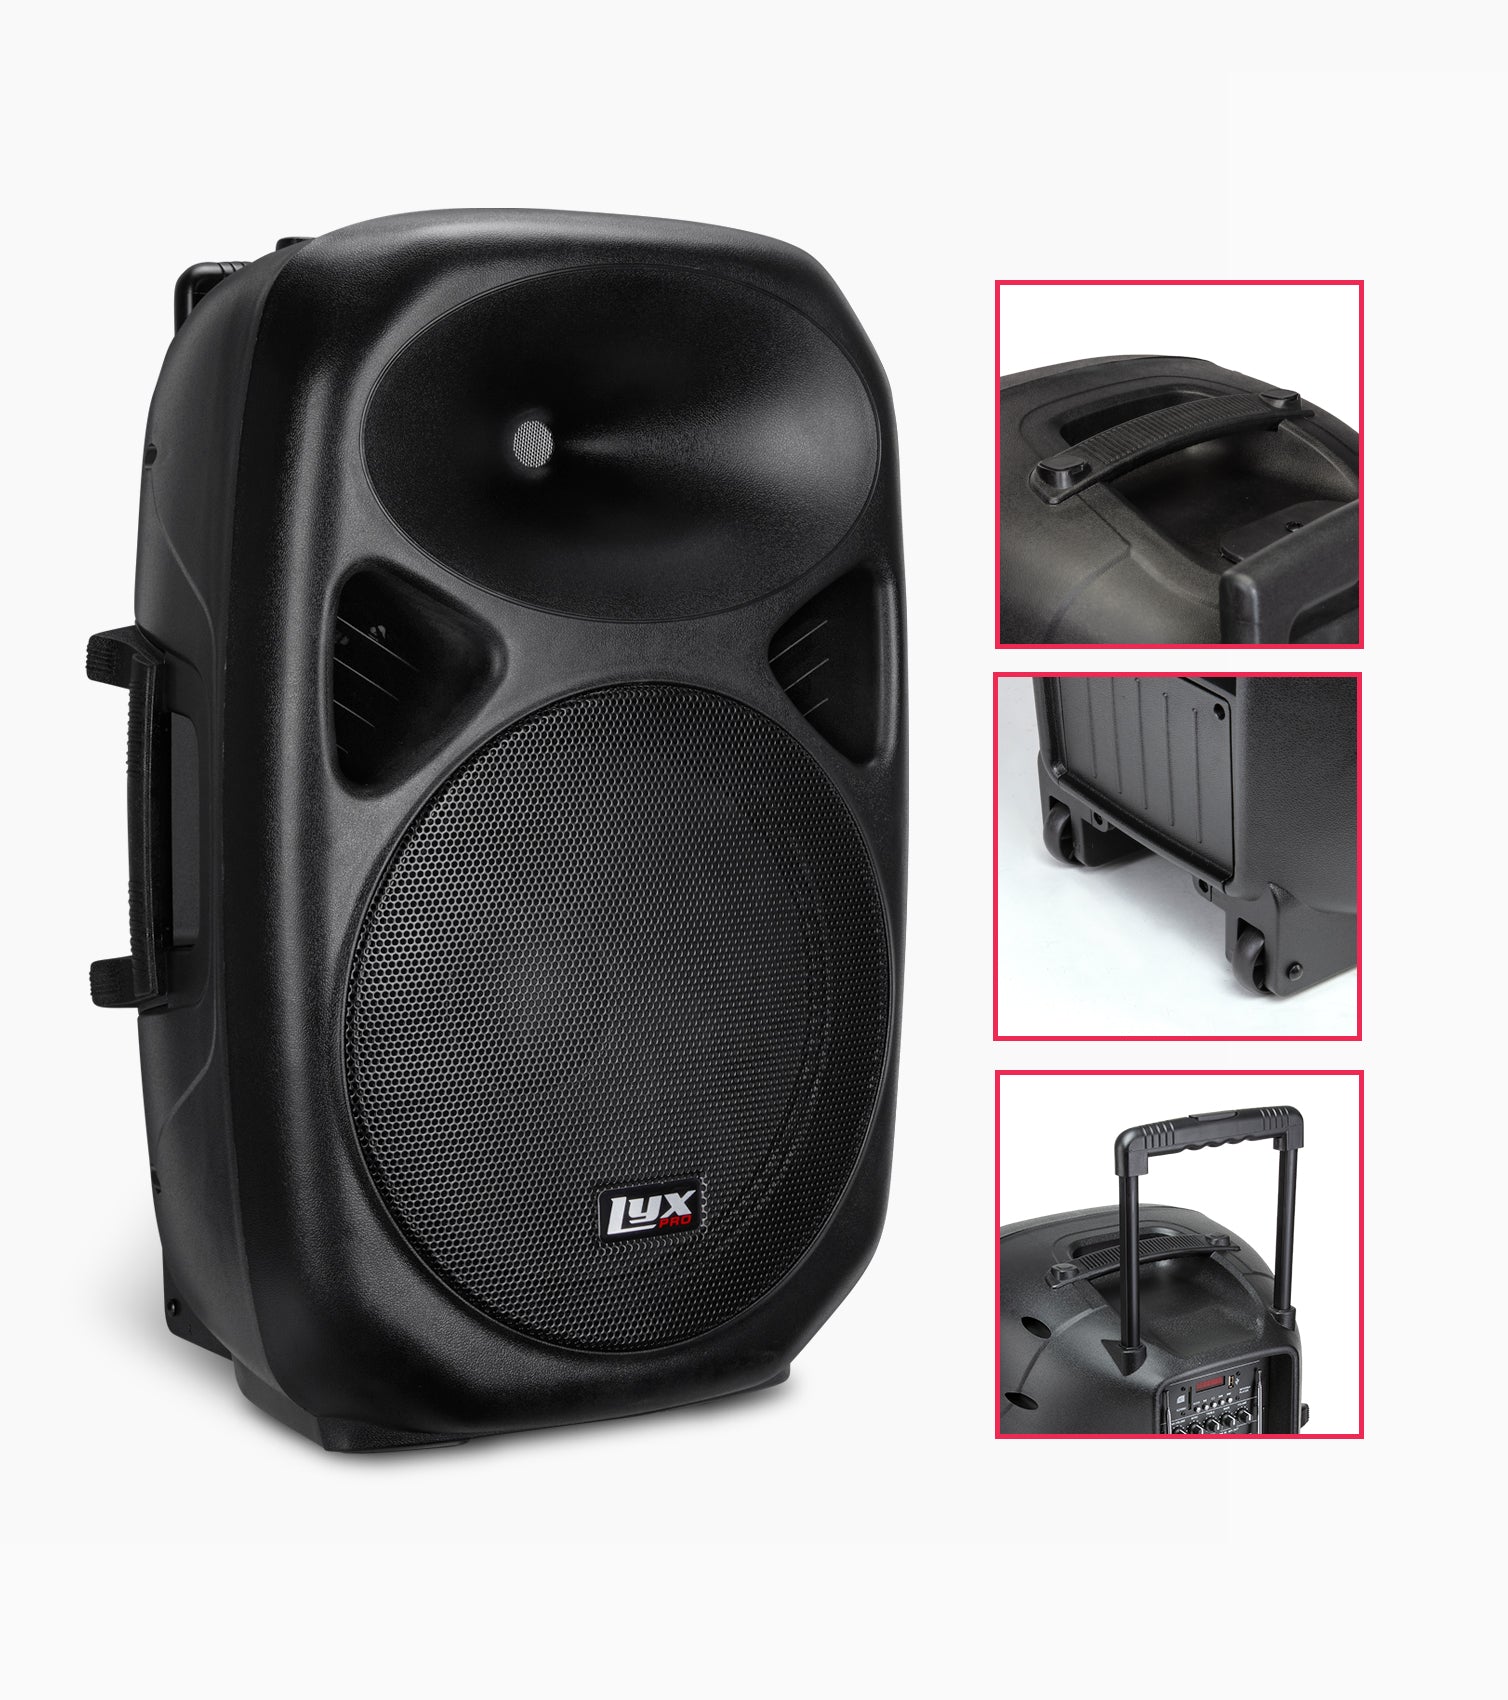 15” portable battery-powered PA speaker parts